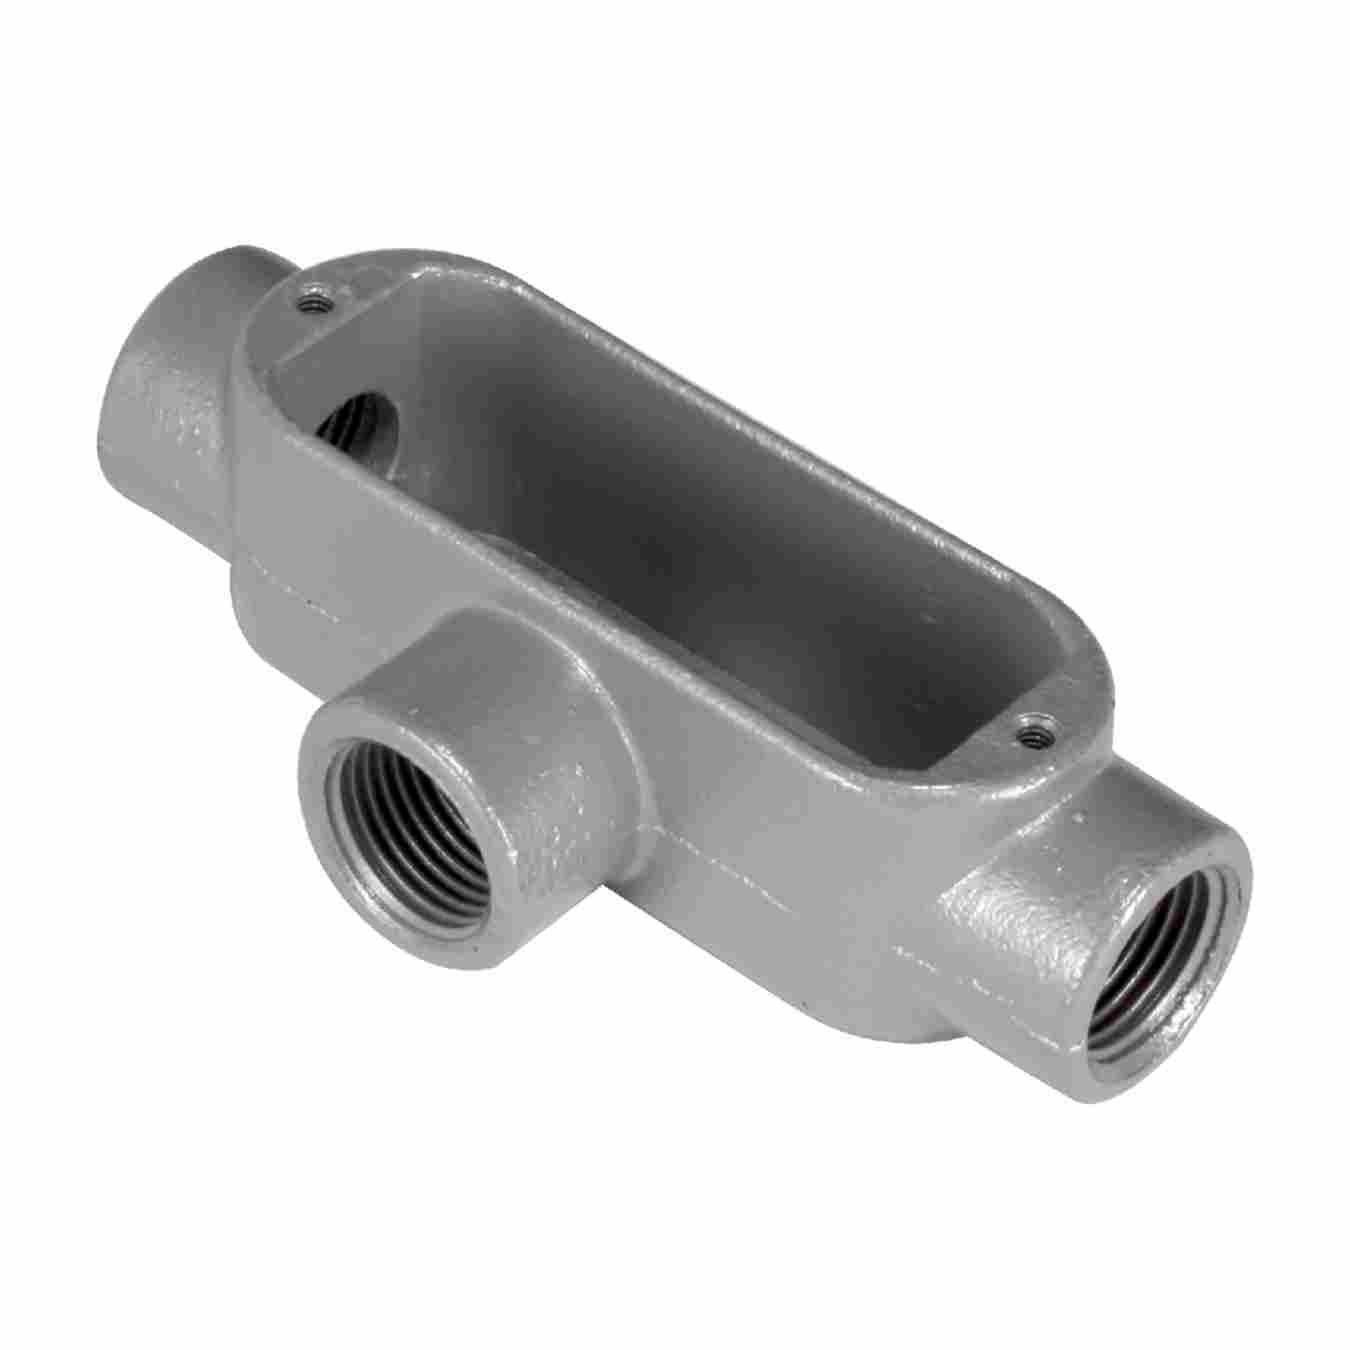 THREADED CONDUIT BODIES "T" SERIES WITHOUT COVERS